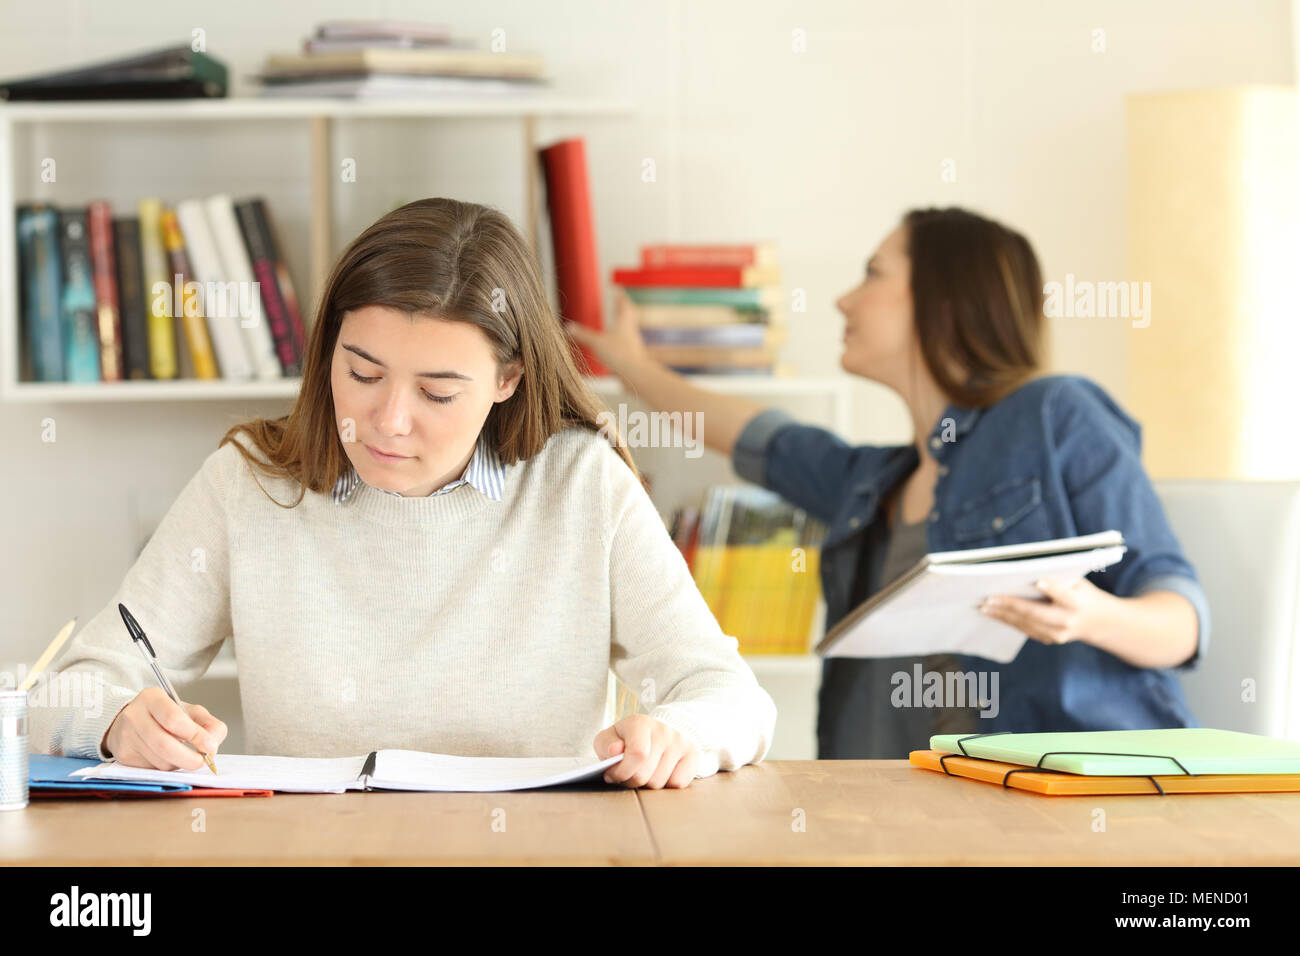 Front view portrait of two college students studying at home Stock Photo